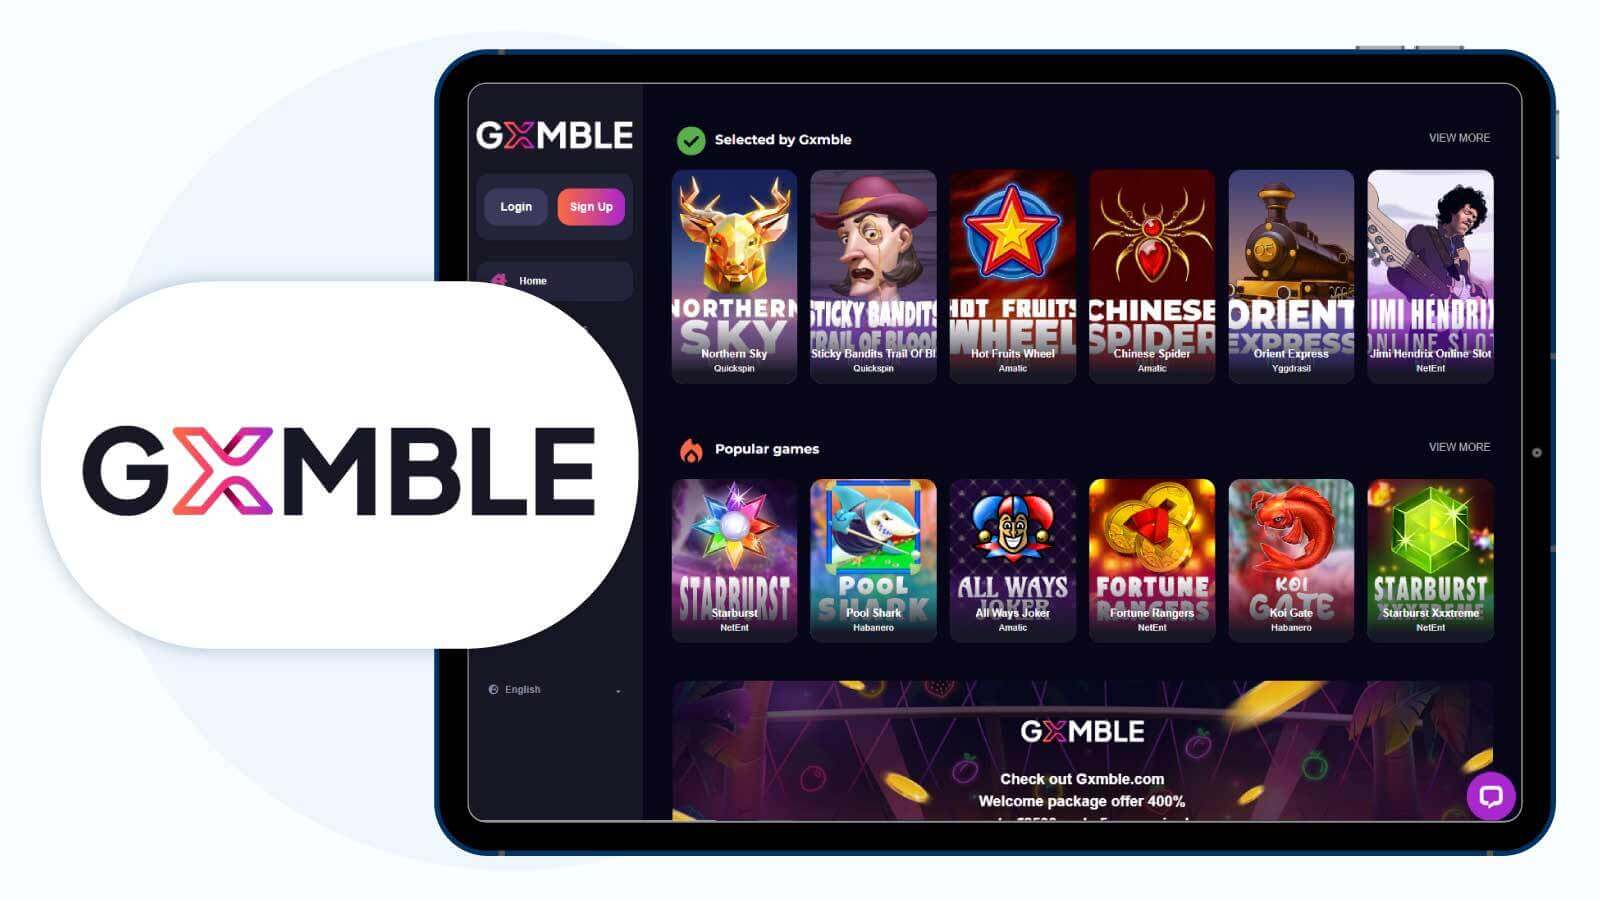 5. Gxmble Casino Discover the Best Online Casino Bonus for Low Playthrough